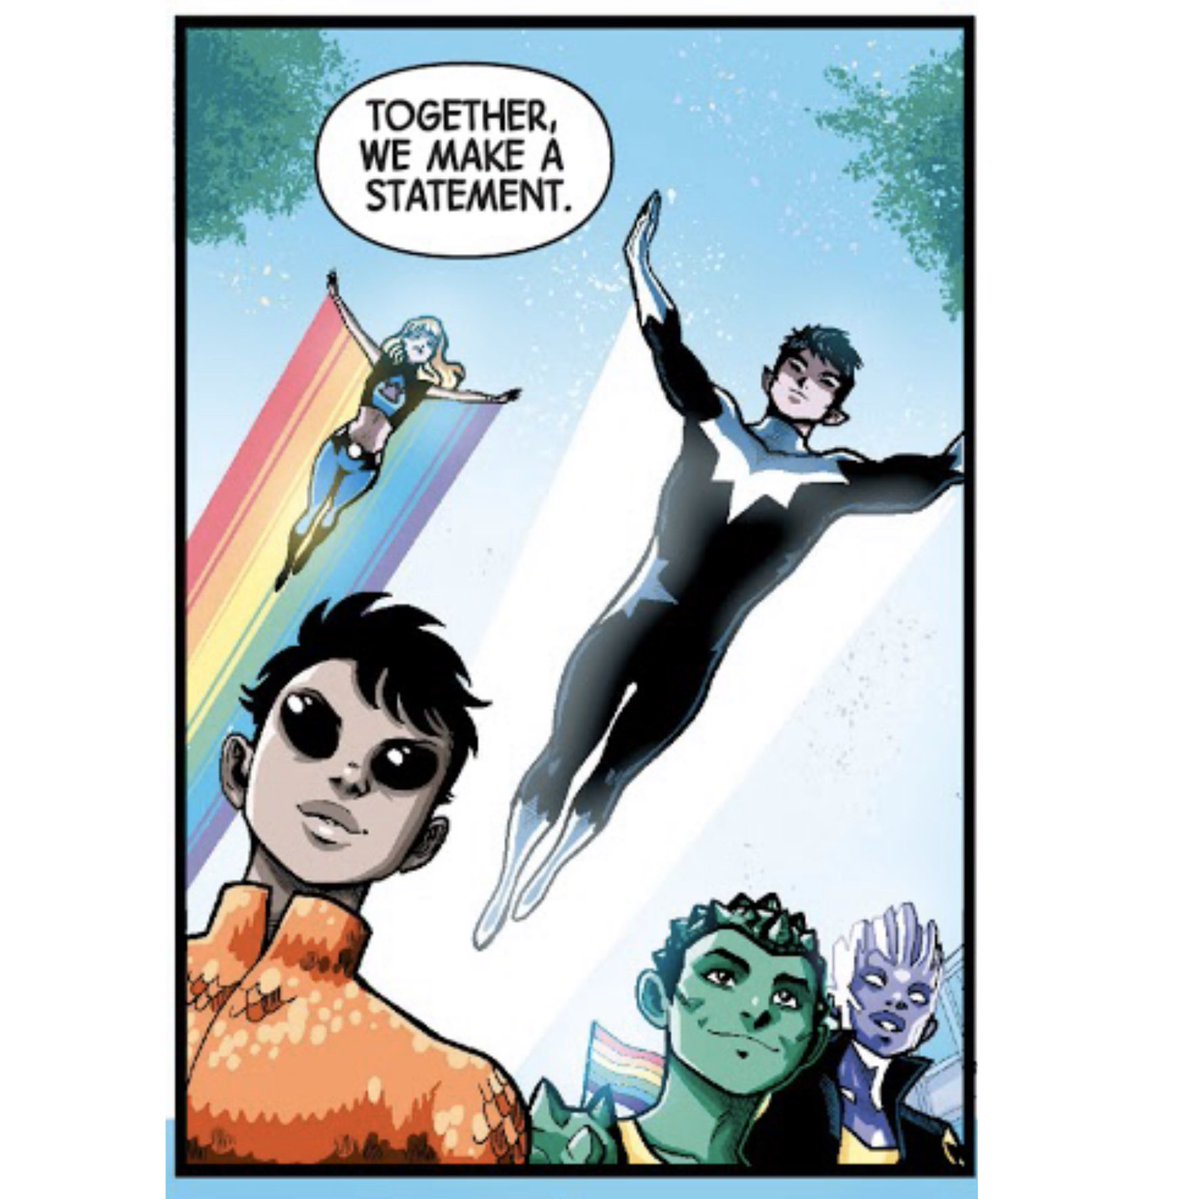 “Together we make a statement.” Northstar, the first Marvel hero to come out. Julie Powers who we’ve seen grow up from childhood to out and proud, Koi Boi representing for trans masculinity, Anole and Bling signifying queer identity overlaps and trumps mutant identity.